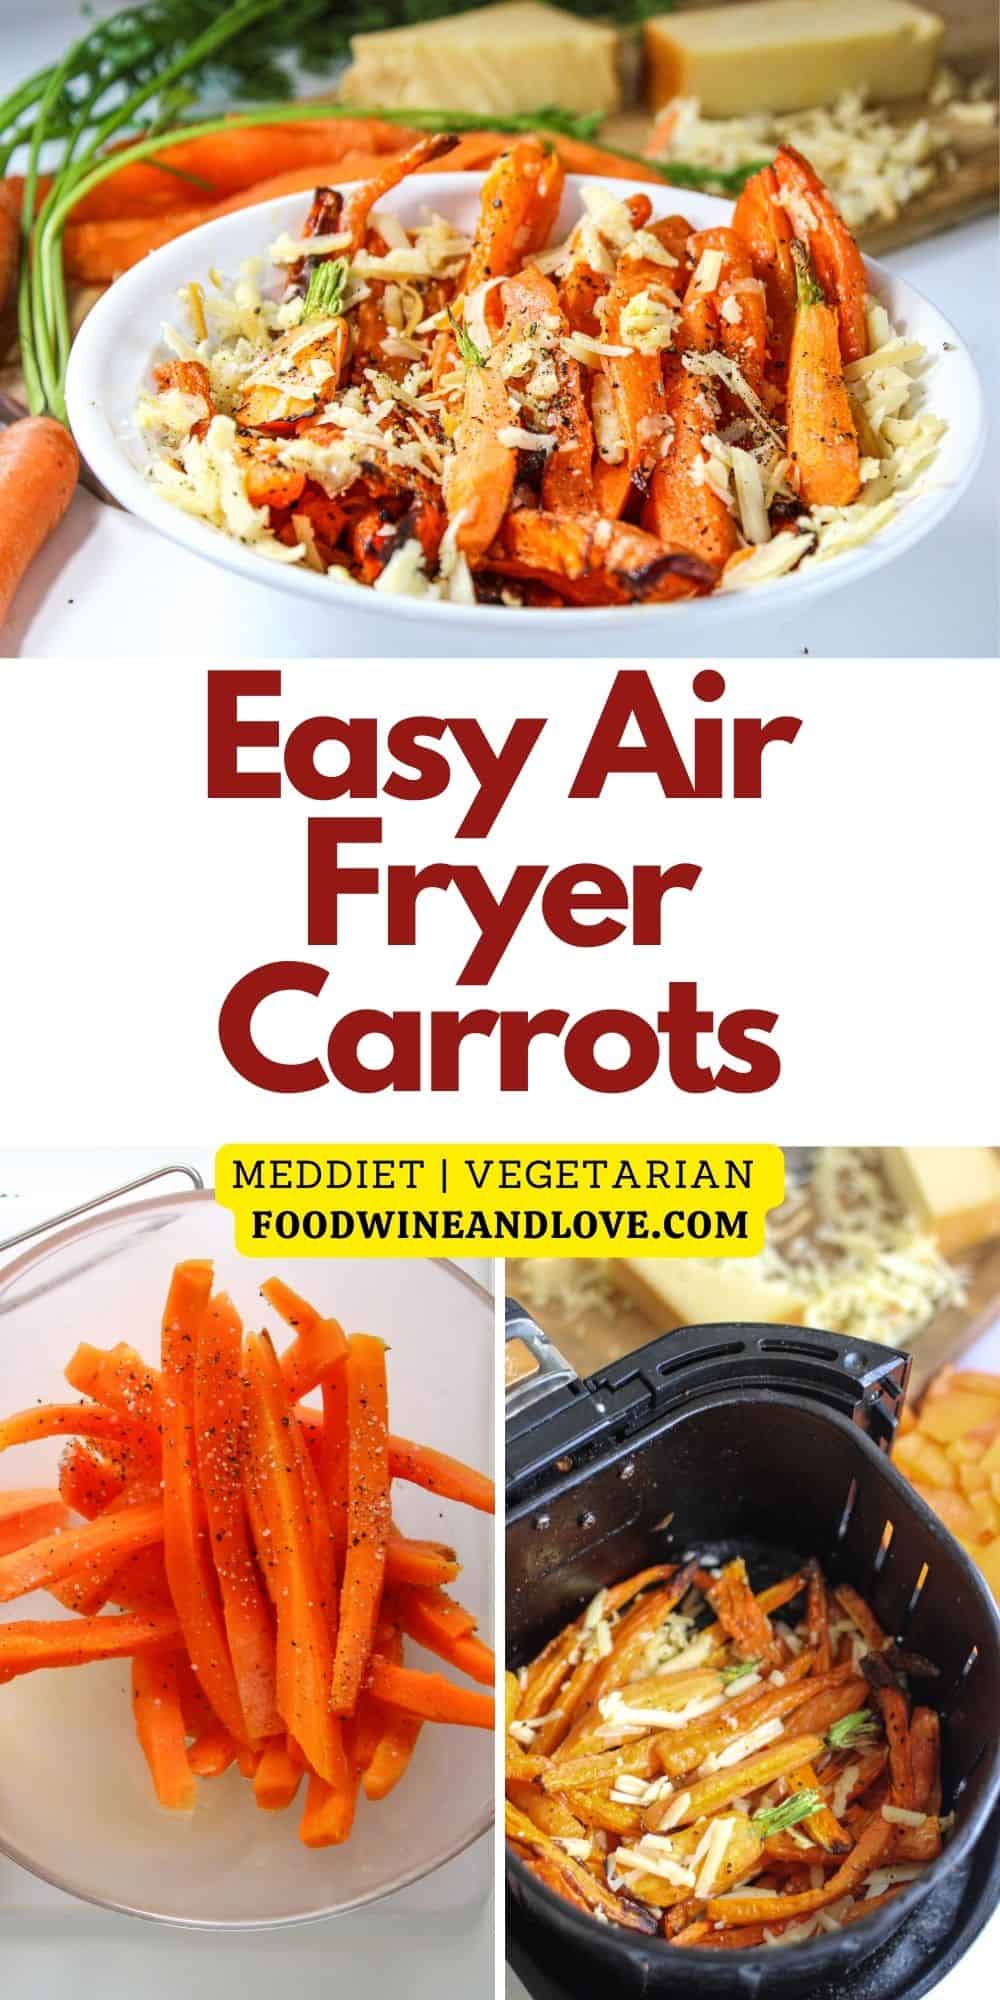 Easy Air Fryer Carrot and Cheese Recipe, a simple vegetarian snack or side recipe for carrots air fried with cheese and seasonings. 